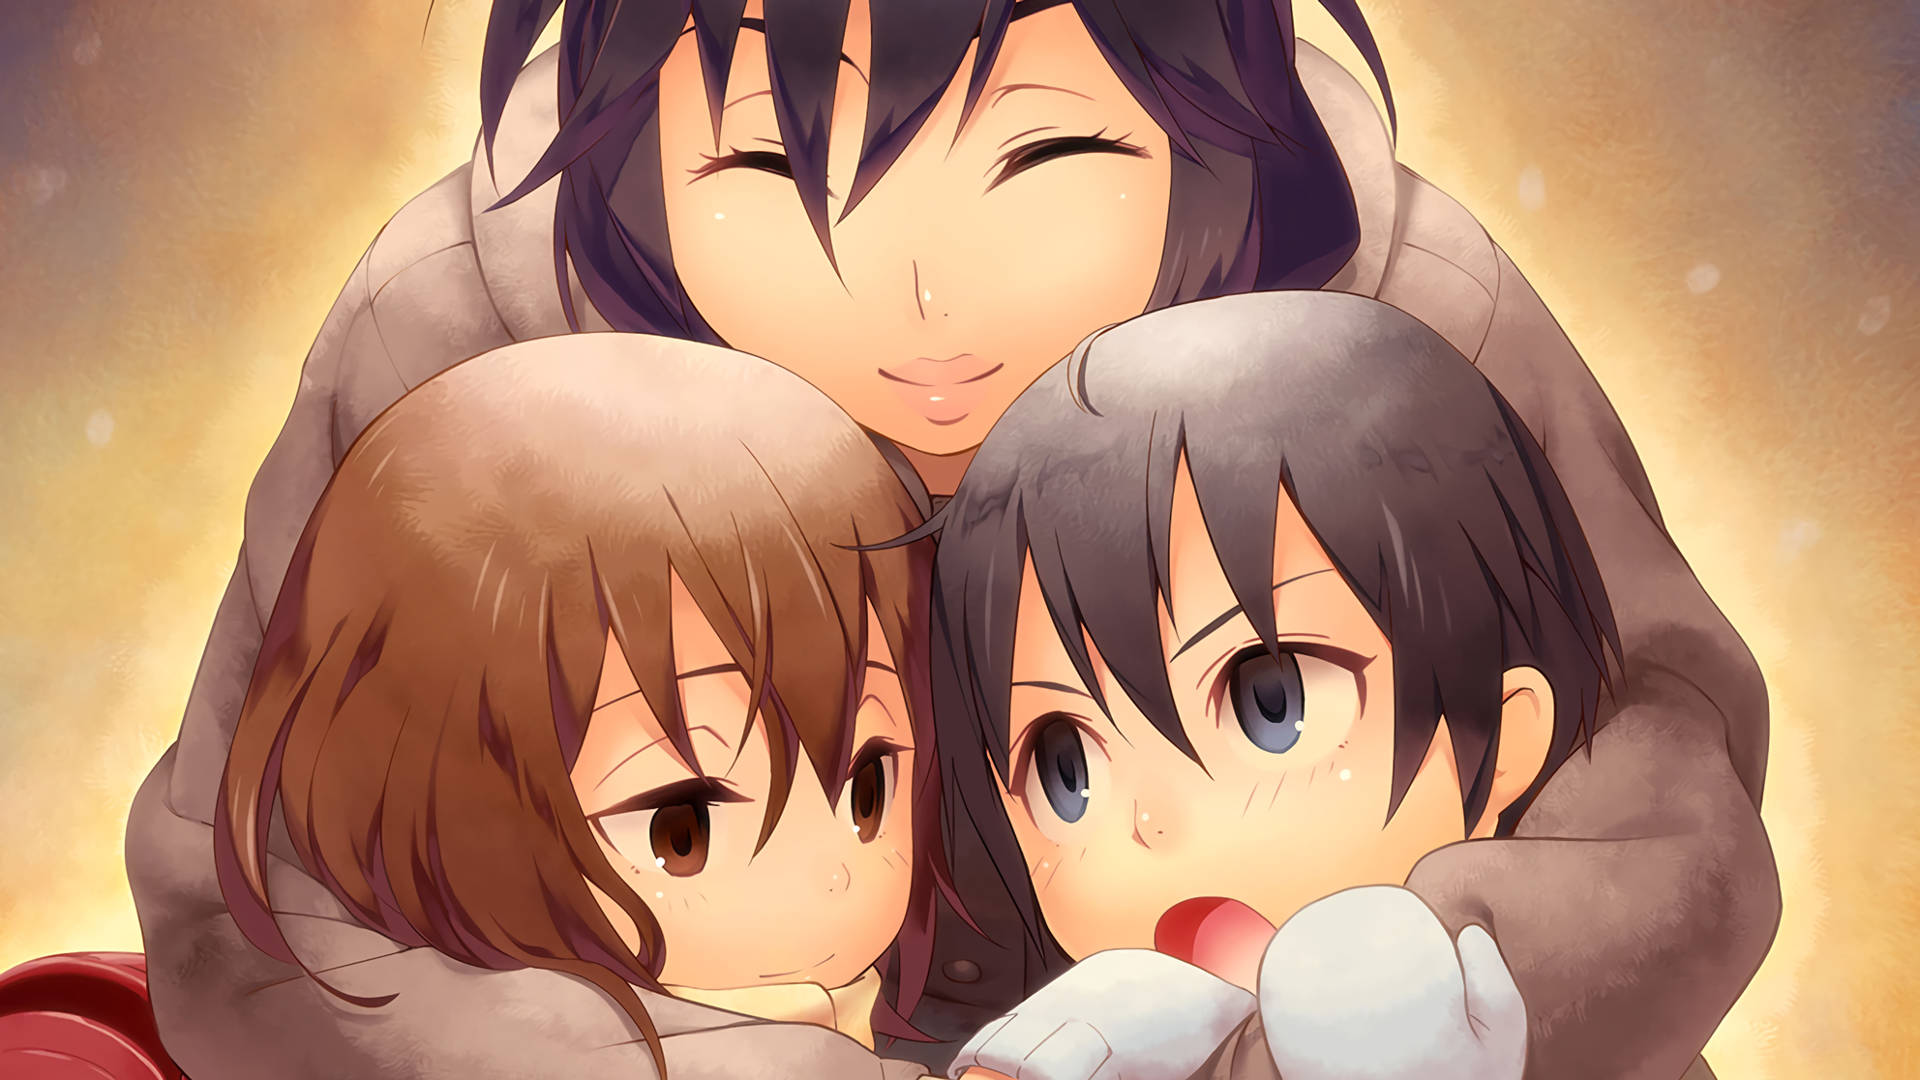 Family Picture Of Erased Characters Wallpaper